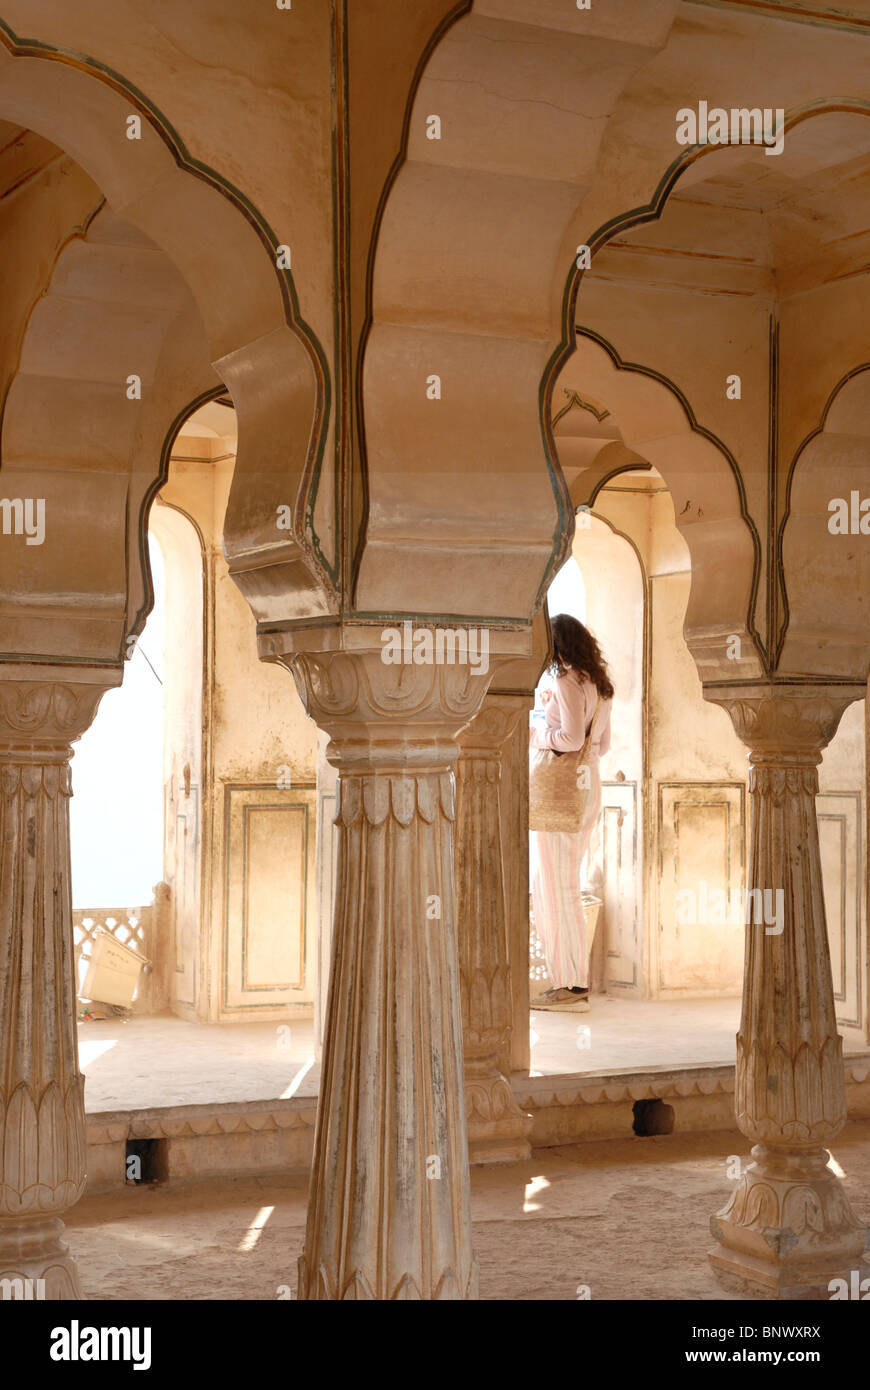 Arches and columns from an Indian Palace interior in Jaipur Rajasthan Stock  Photo - Alamy